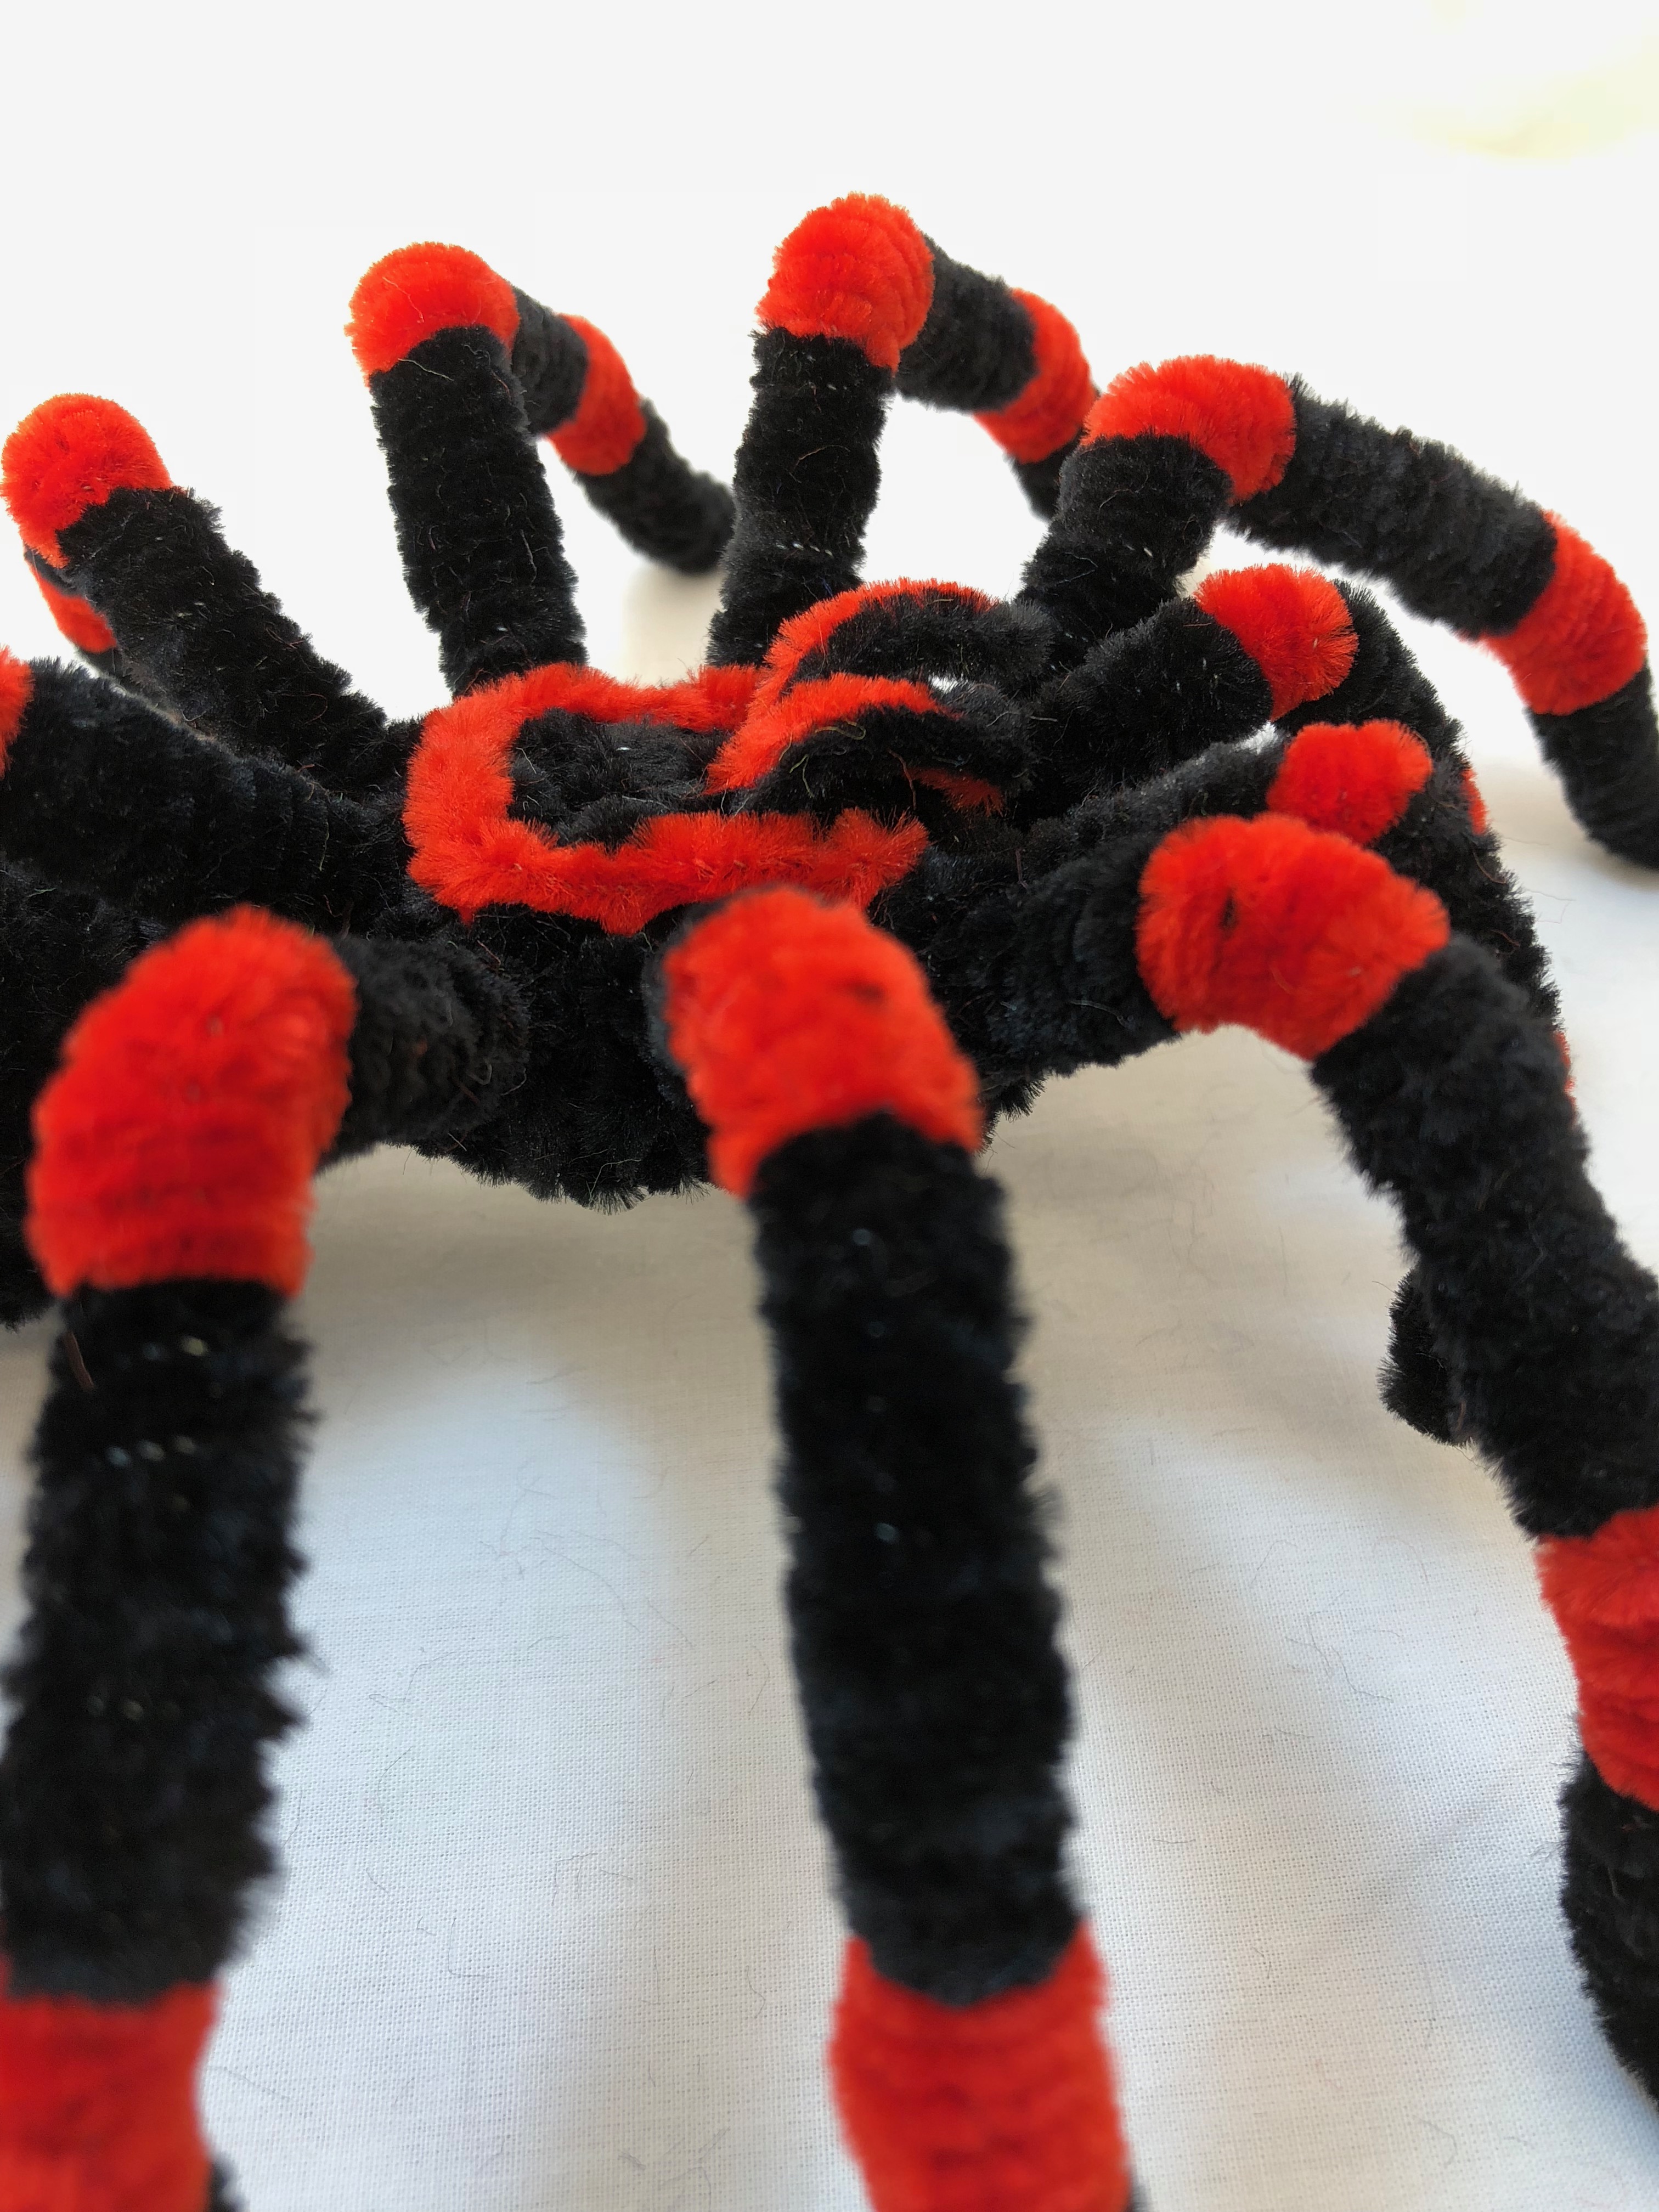 Pipe Cleaner Tarantula in 15 Steps – Step By Step Instructions  (Intermediate 3 hour project) – Pipe Cleaner Animals